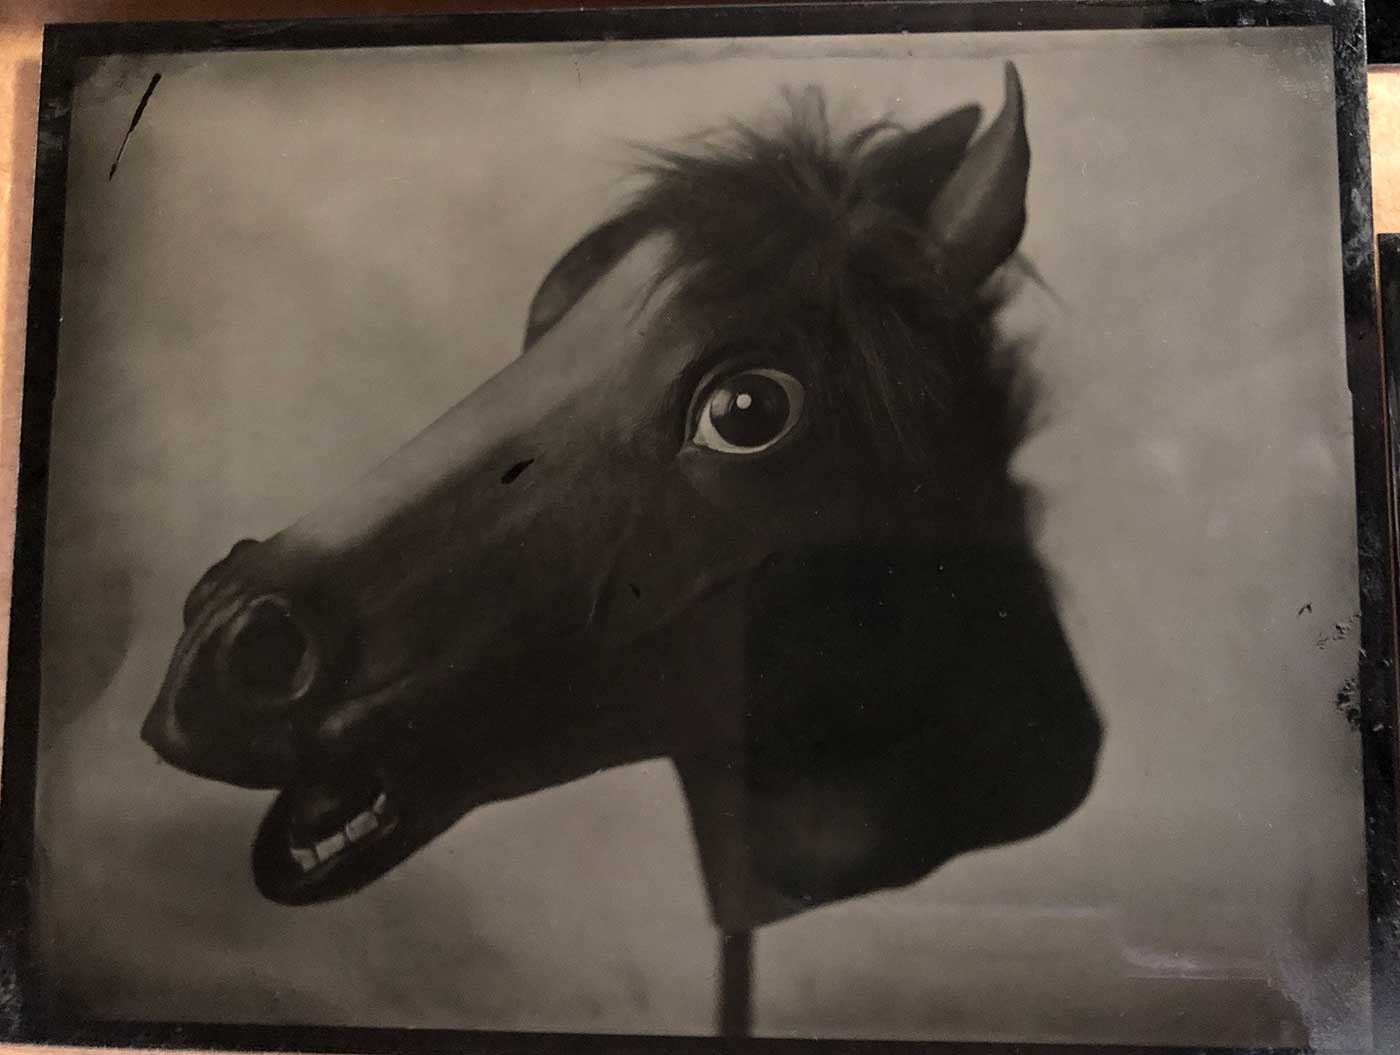 Using a $500 mini grant from the Mississippi Arts Commission, MSU Professor of Photography Marita Gootee attended a two-day workshop to learn about the instant photographic process called Wet Plate. During the workshop, she created this work, “Horse Mask.” (Photo submitted)